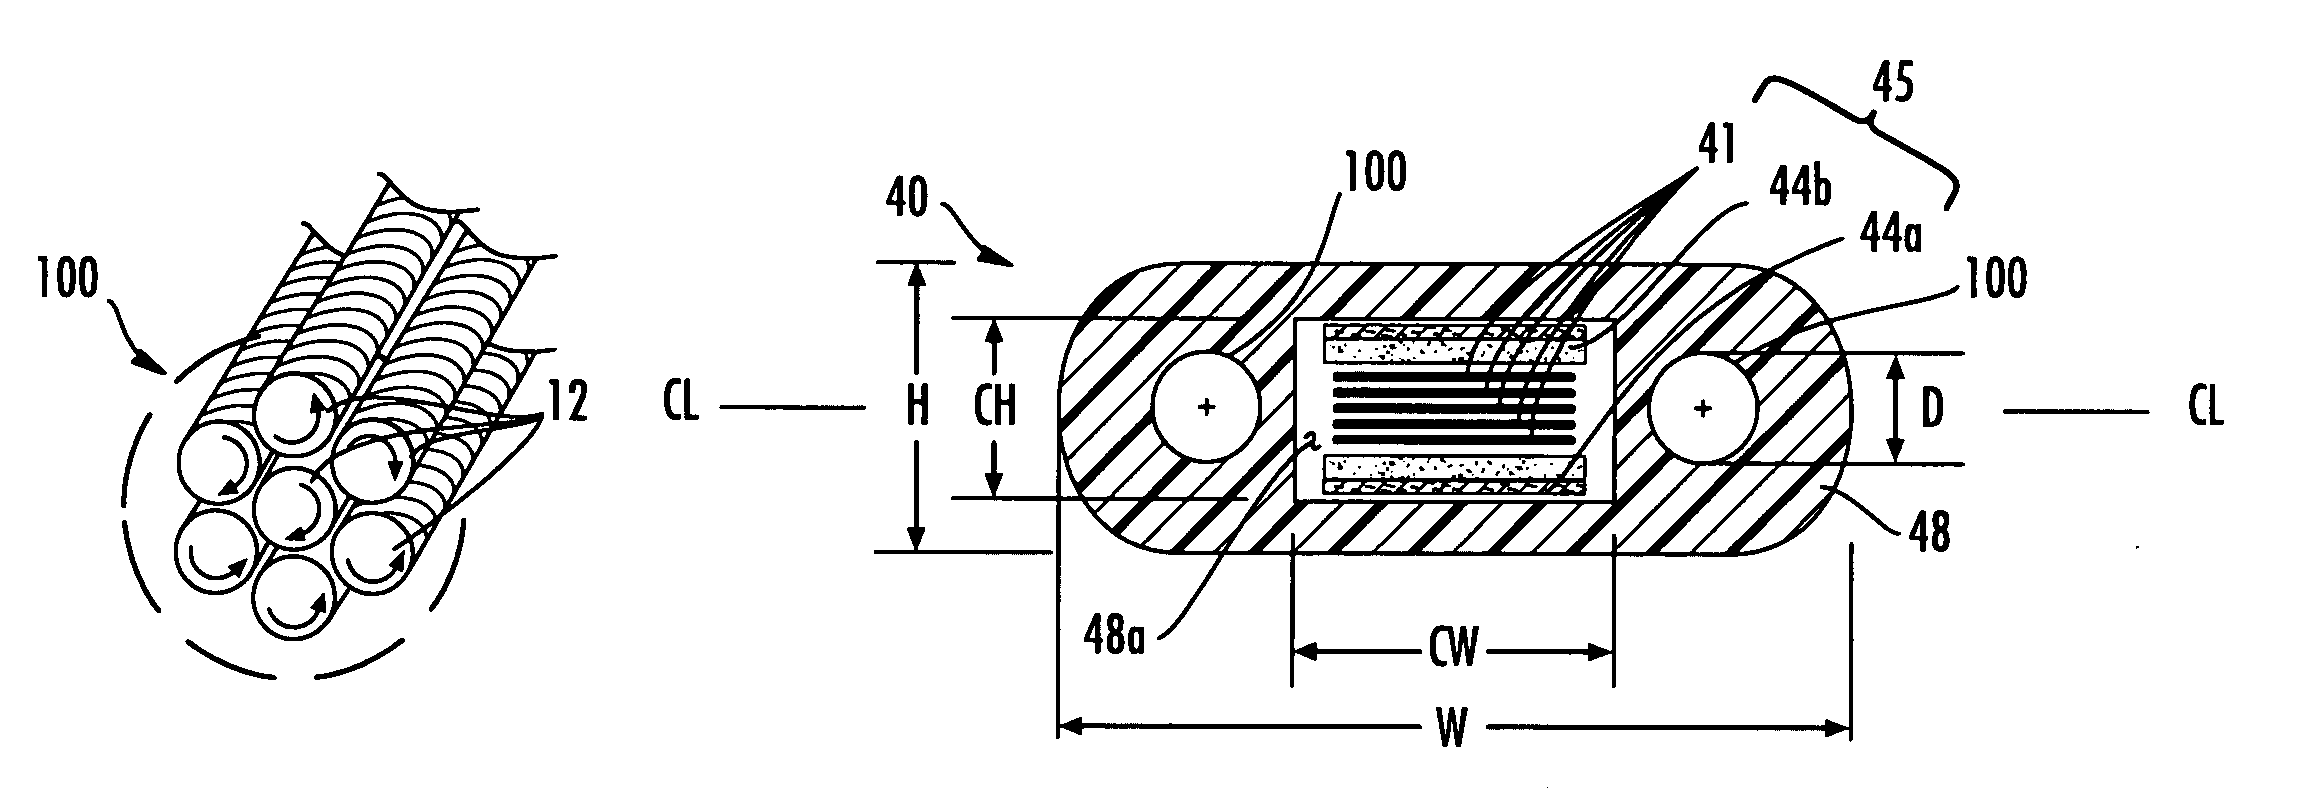 Tubeless fiber optic cables having strength members and methods therefor